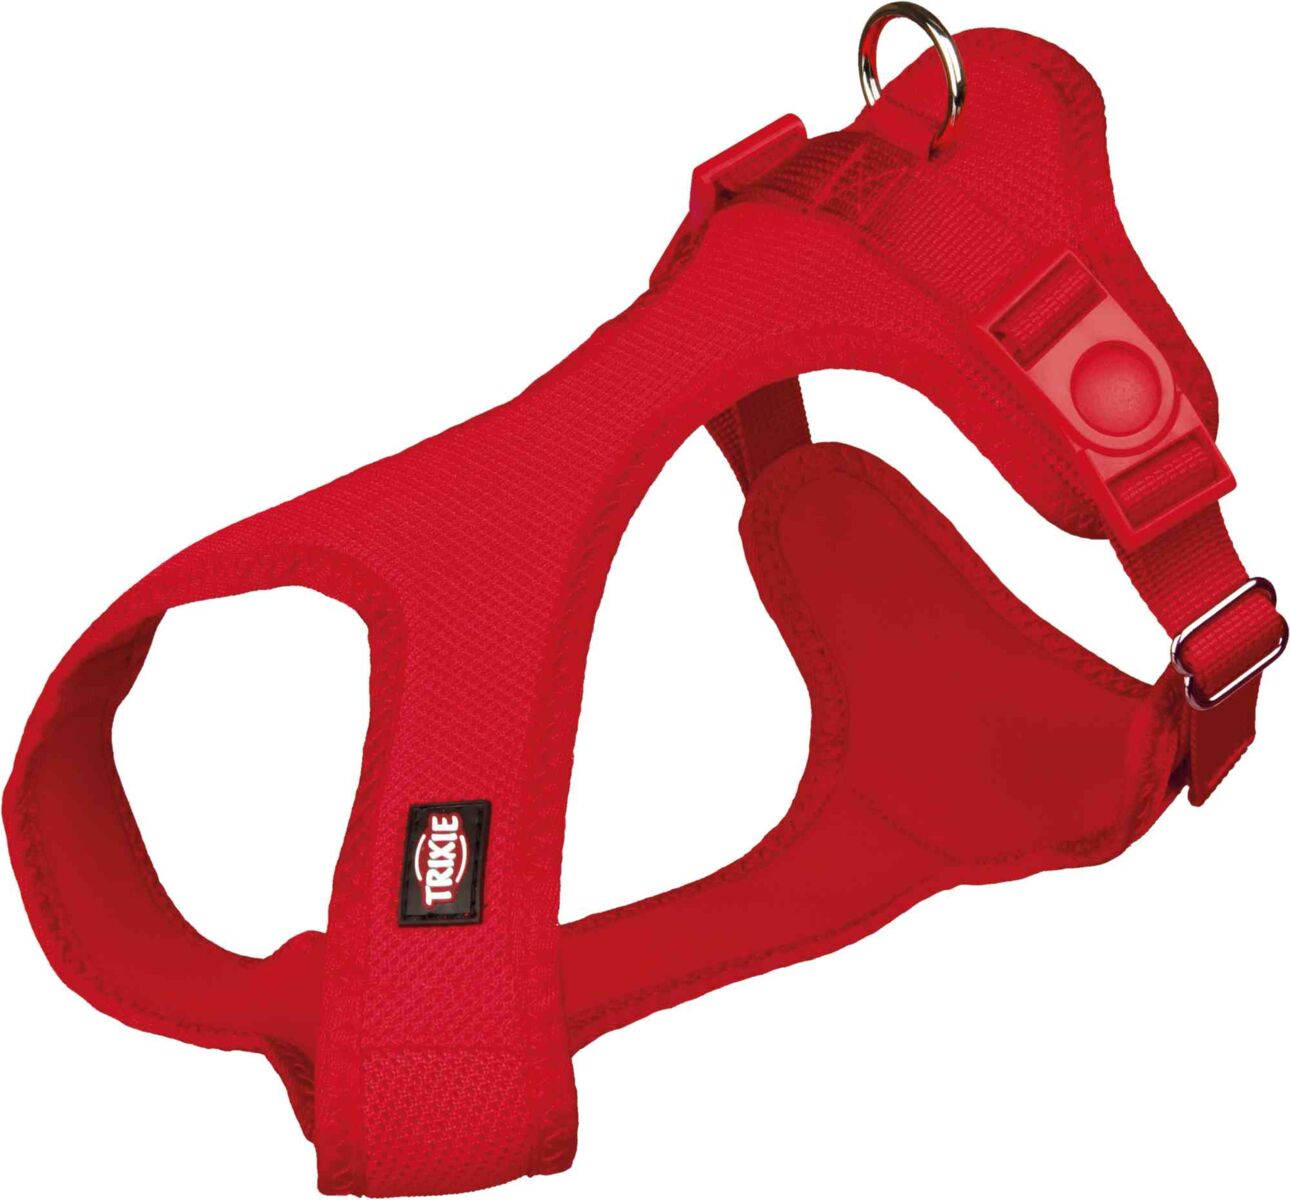 COMFORT SOFT TOURING HARNESS S-M 35-60CM RED